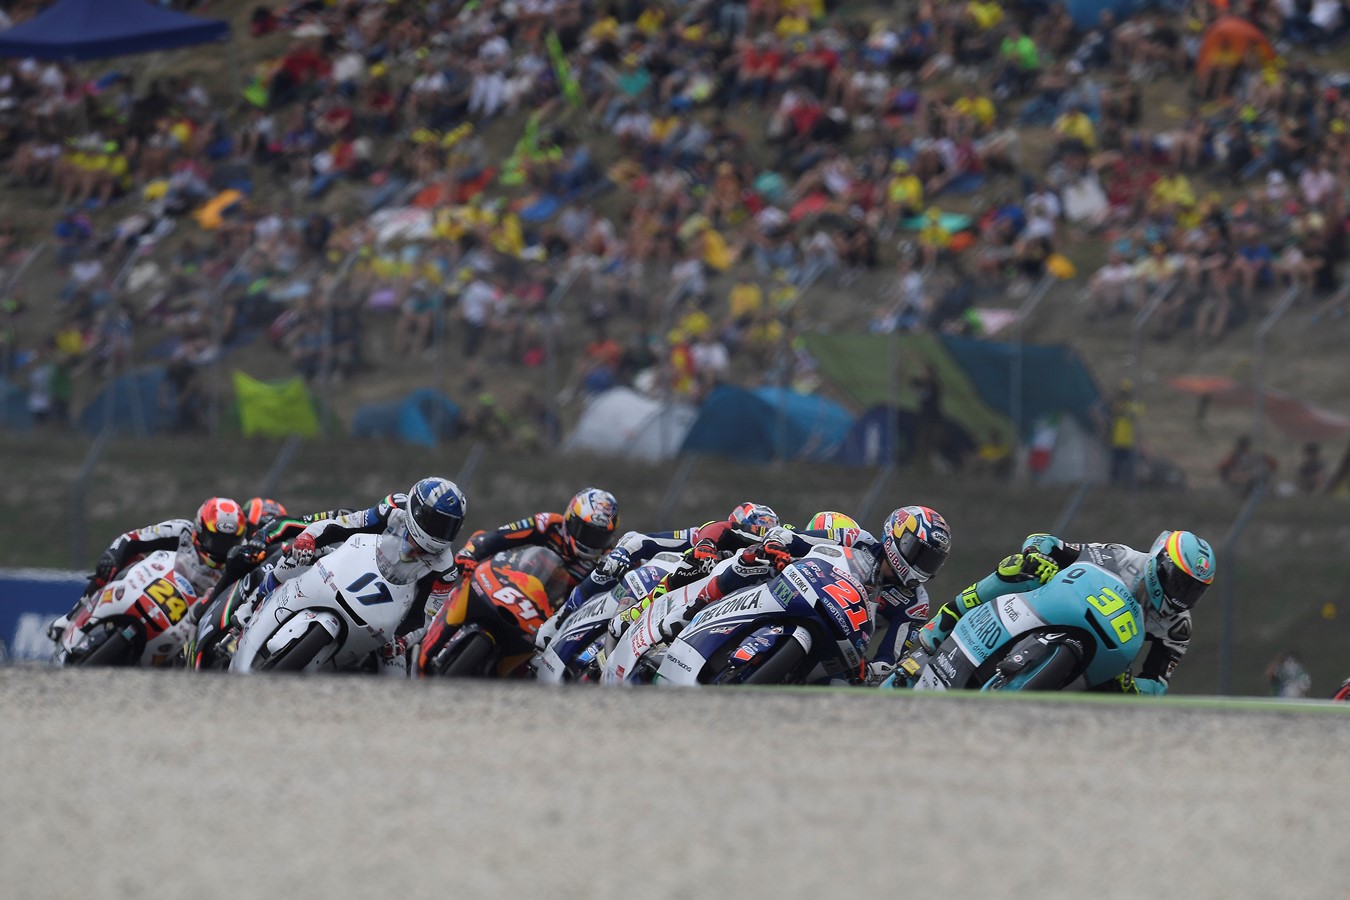 Mugello Moto3 race ended with one of the closest finishes in GP history